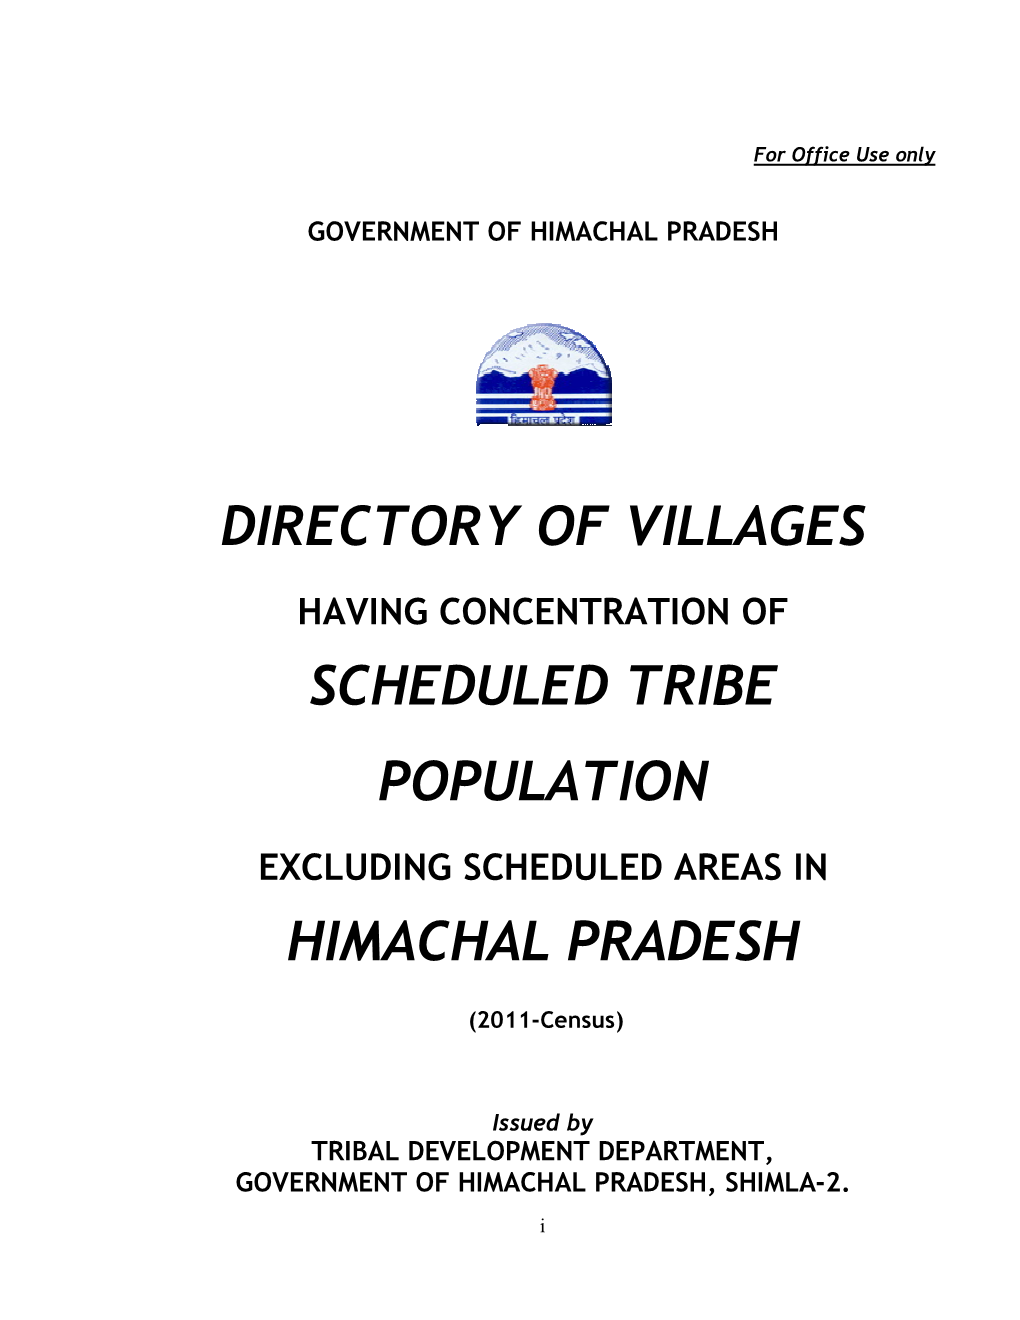 Directory of Villages Scheduled Tribe Population